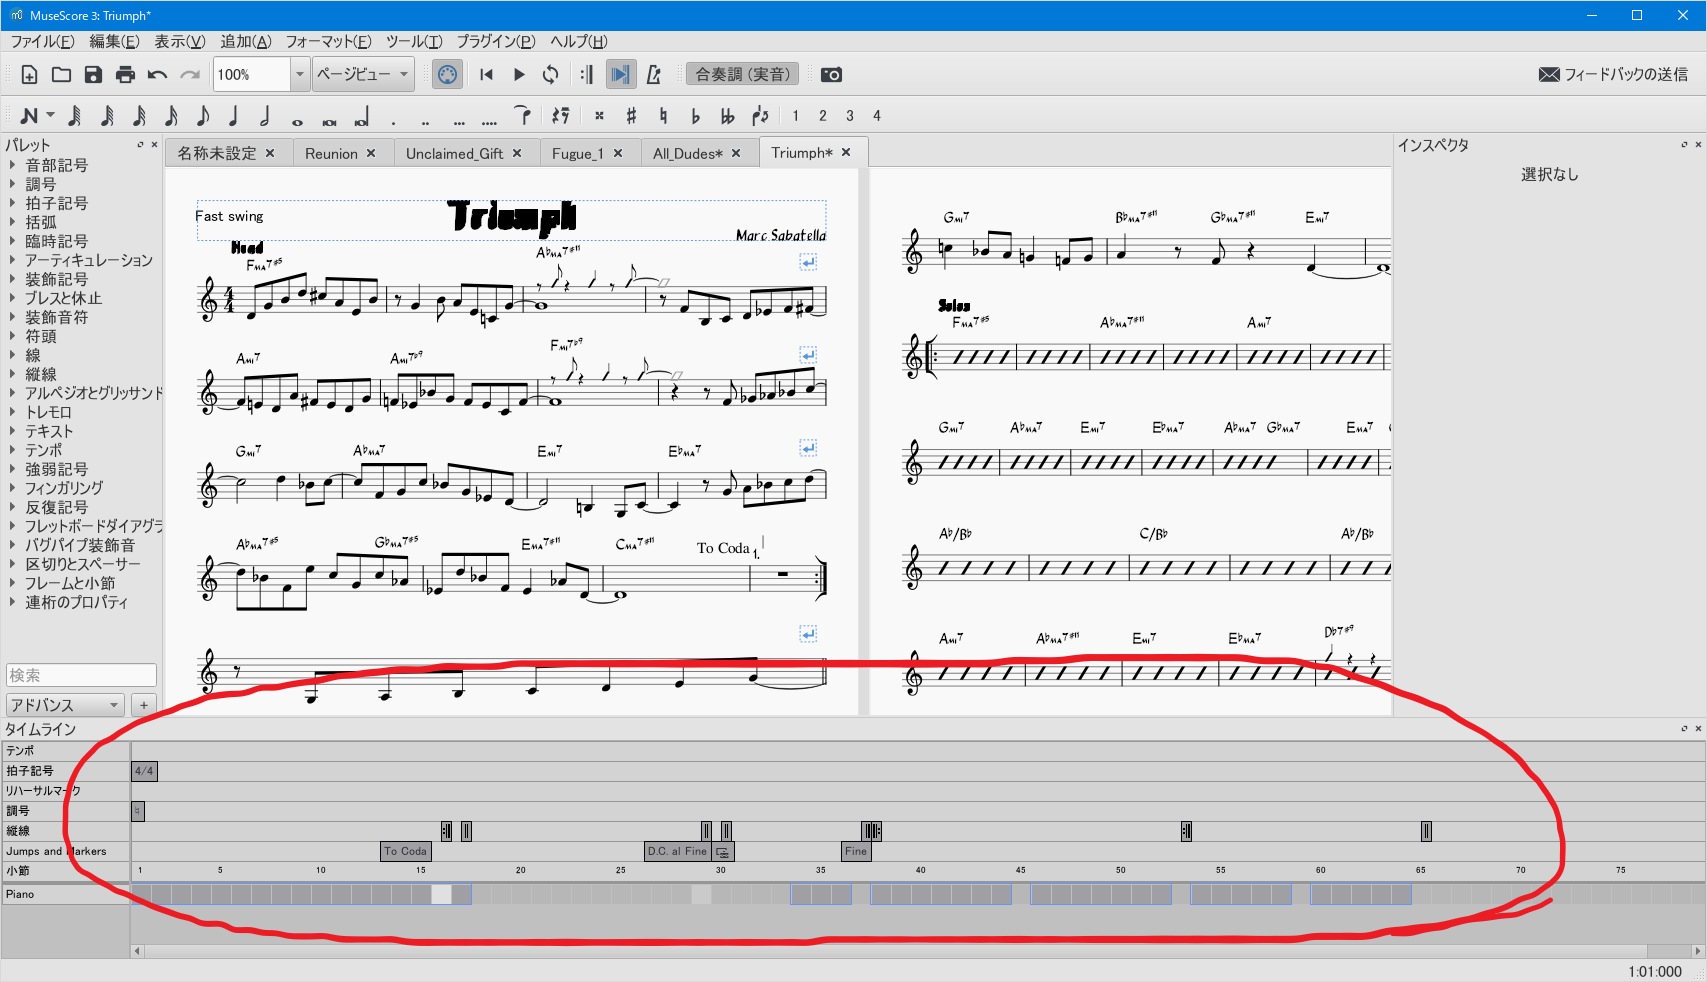 MuseScore3_Timeline.png